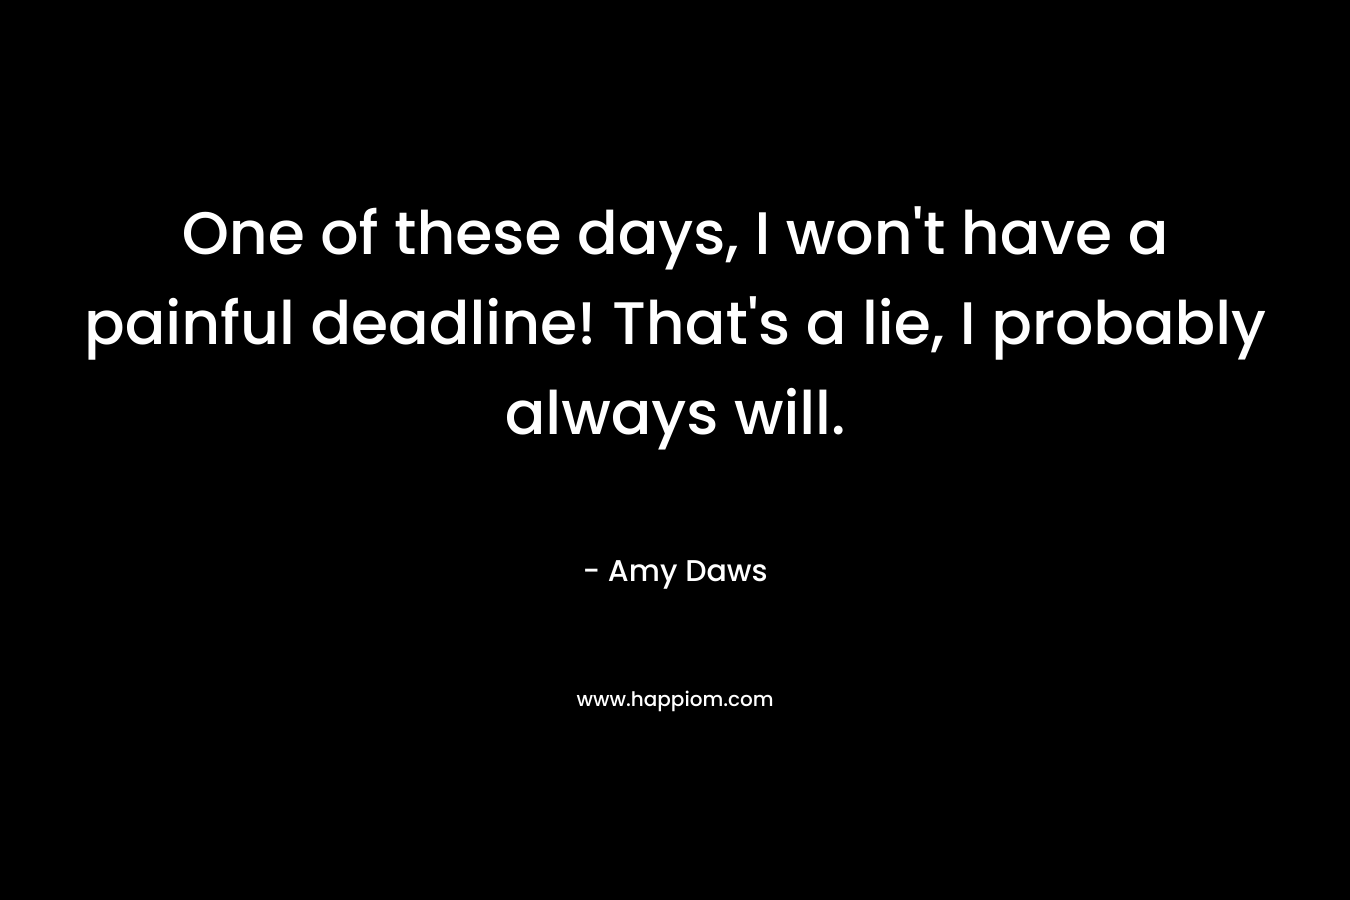 One of these days, I won't have a painful deadline! That's a lie, I probably always will.